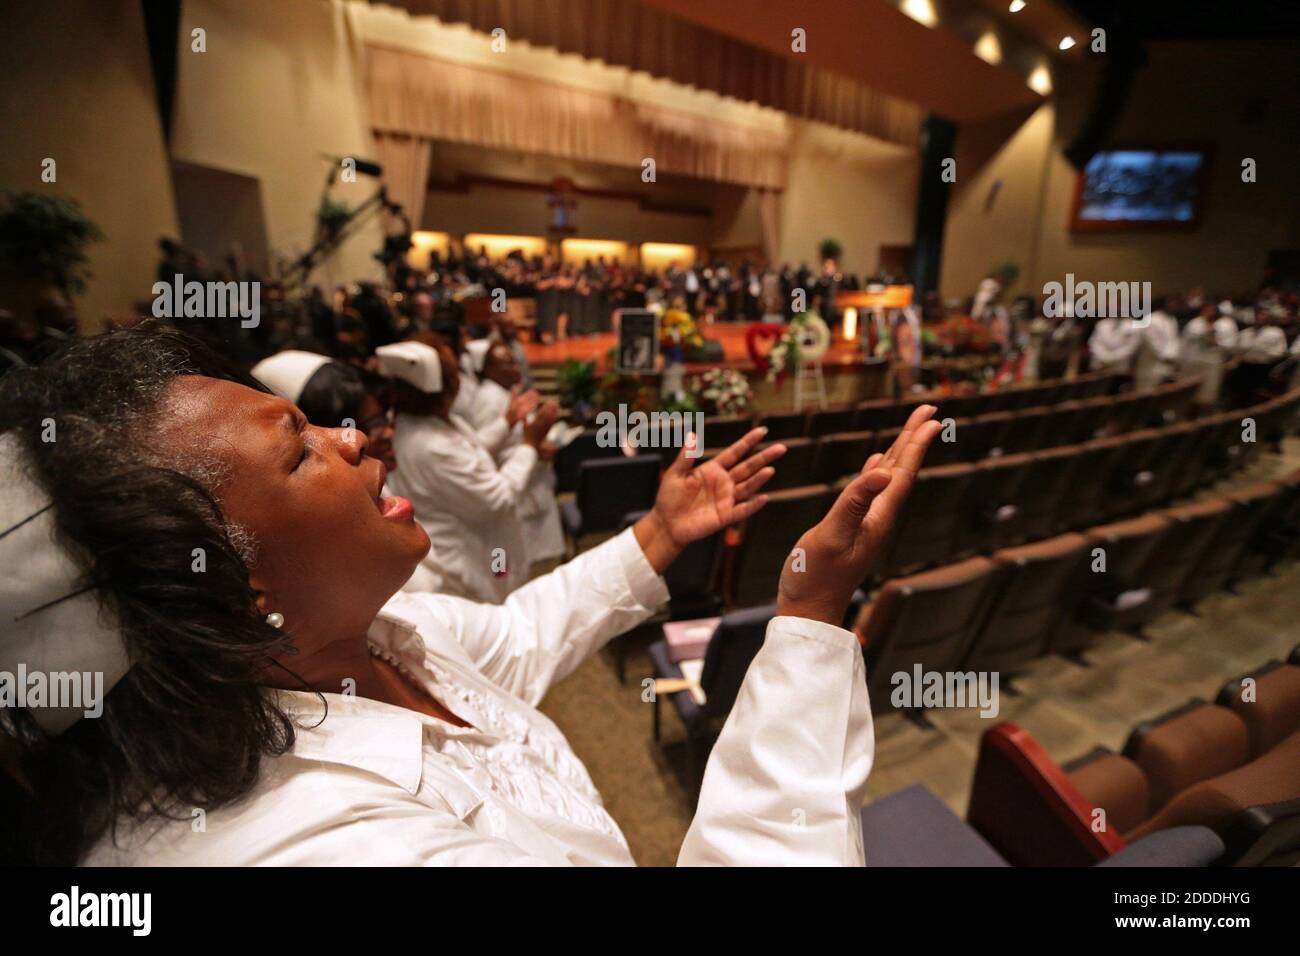 NO FILM, NO VIDEO, NO TV, NO DOCUMENTARY - A woman lifts up her hands during the funeral services for Michael Brown are held on Monday, August 25, 2014, at Friendly Temple Missionary Baptist Church in St. Louis, MO, USA. Michael Brown, 18, was shot and killed by a Ferguson police officer on August 9, 2014. Photo by Robert Cohen/St. Louis Post-Dispatch/MCT/ABACAPRESS.COM Stock Photo